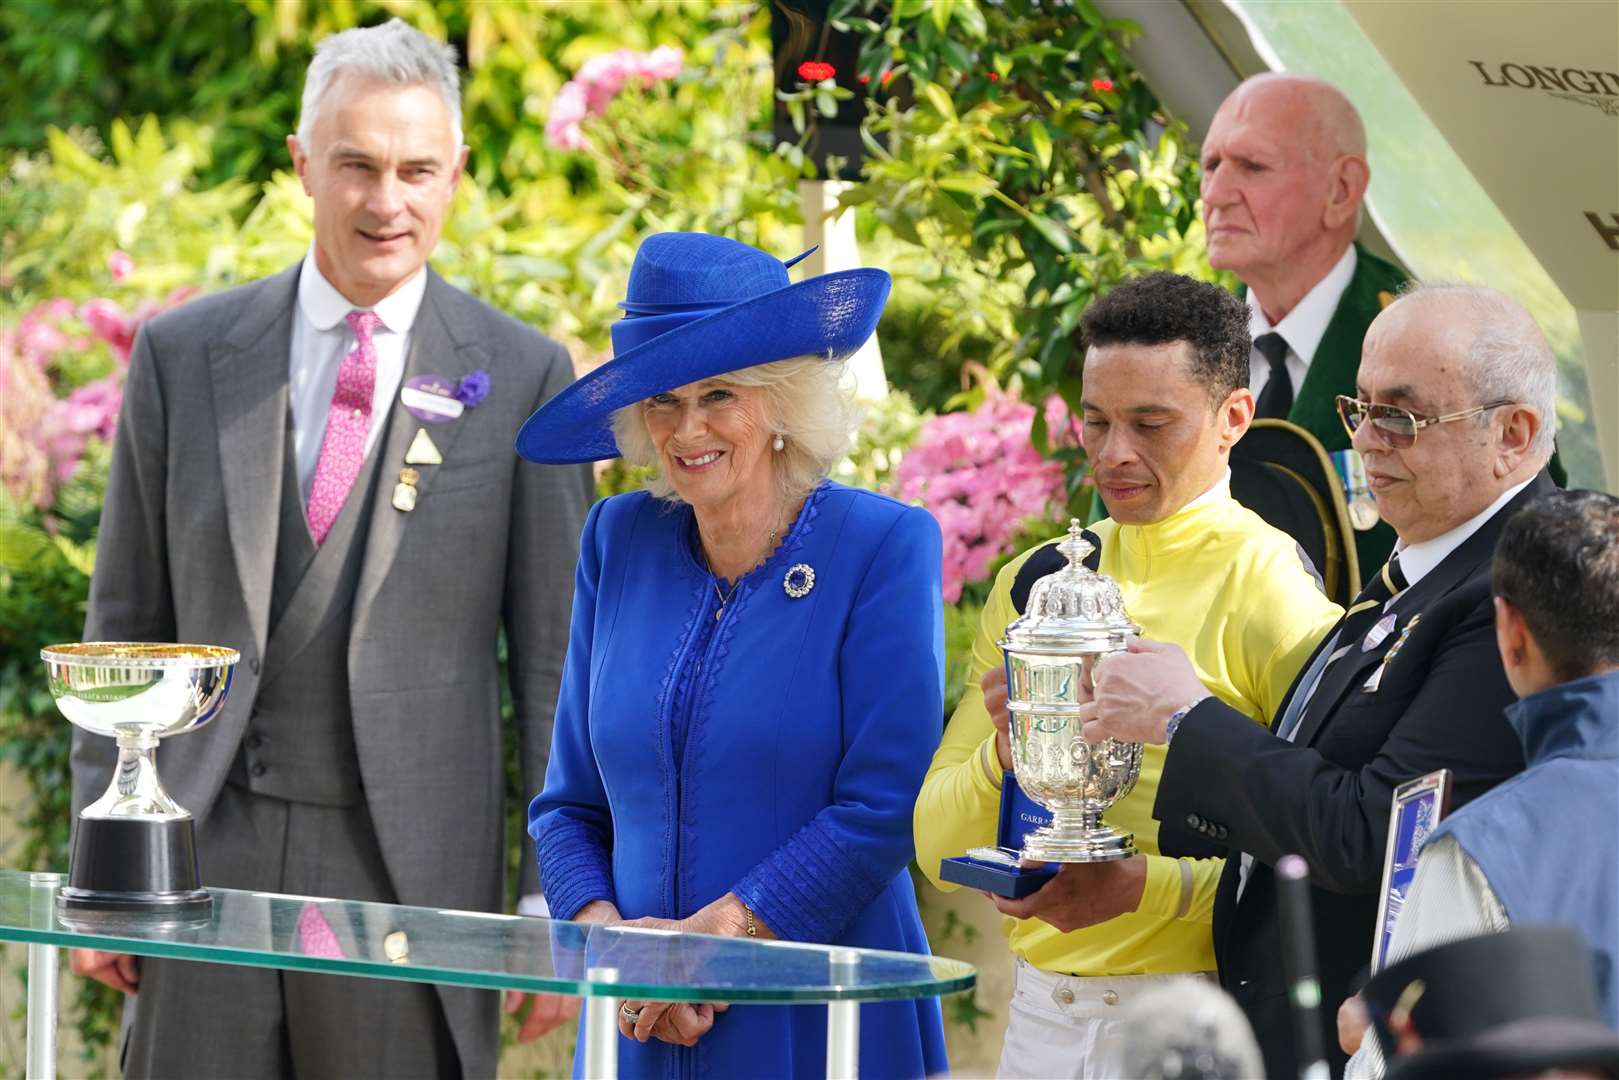 The Queen presents a trophy to winning jockey Sean Levey following the St James’s Palace Stakes on day one of Royal Ascot (Jonathan Brady/PA)